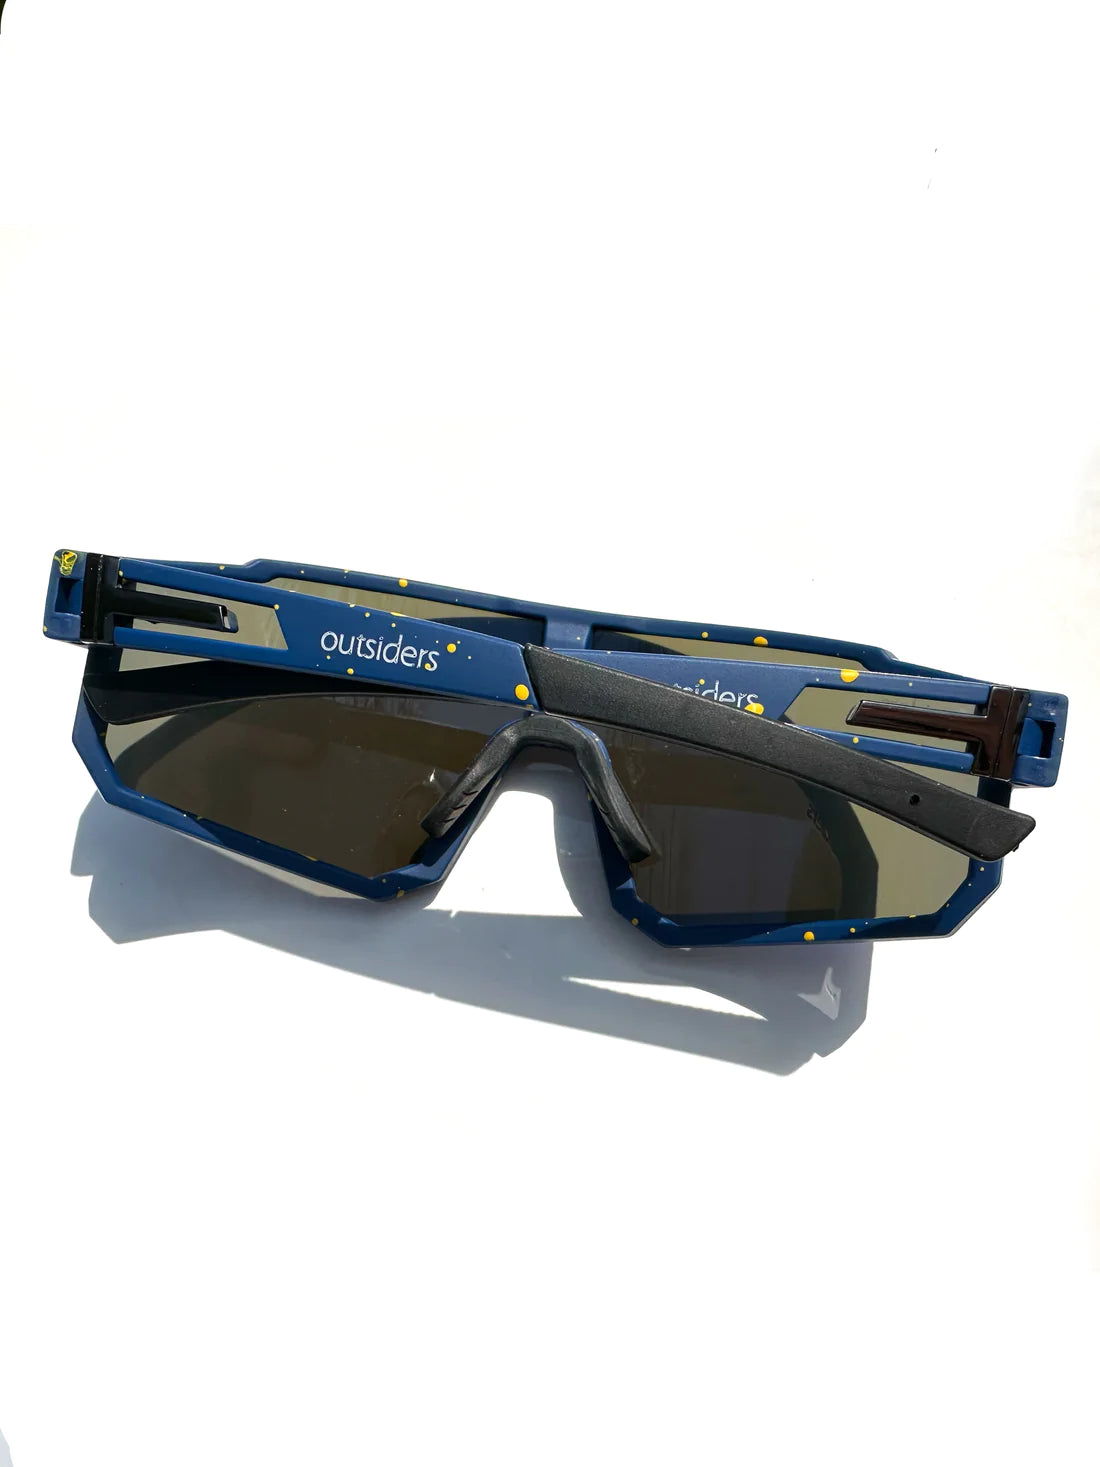 Outsiders Spaced  Sunglasses - Matte Navy/Yellow Speckled